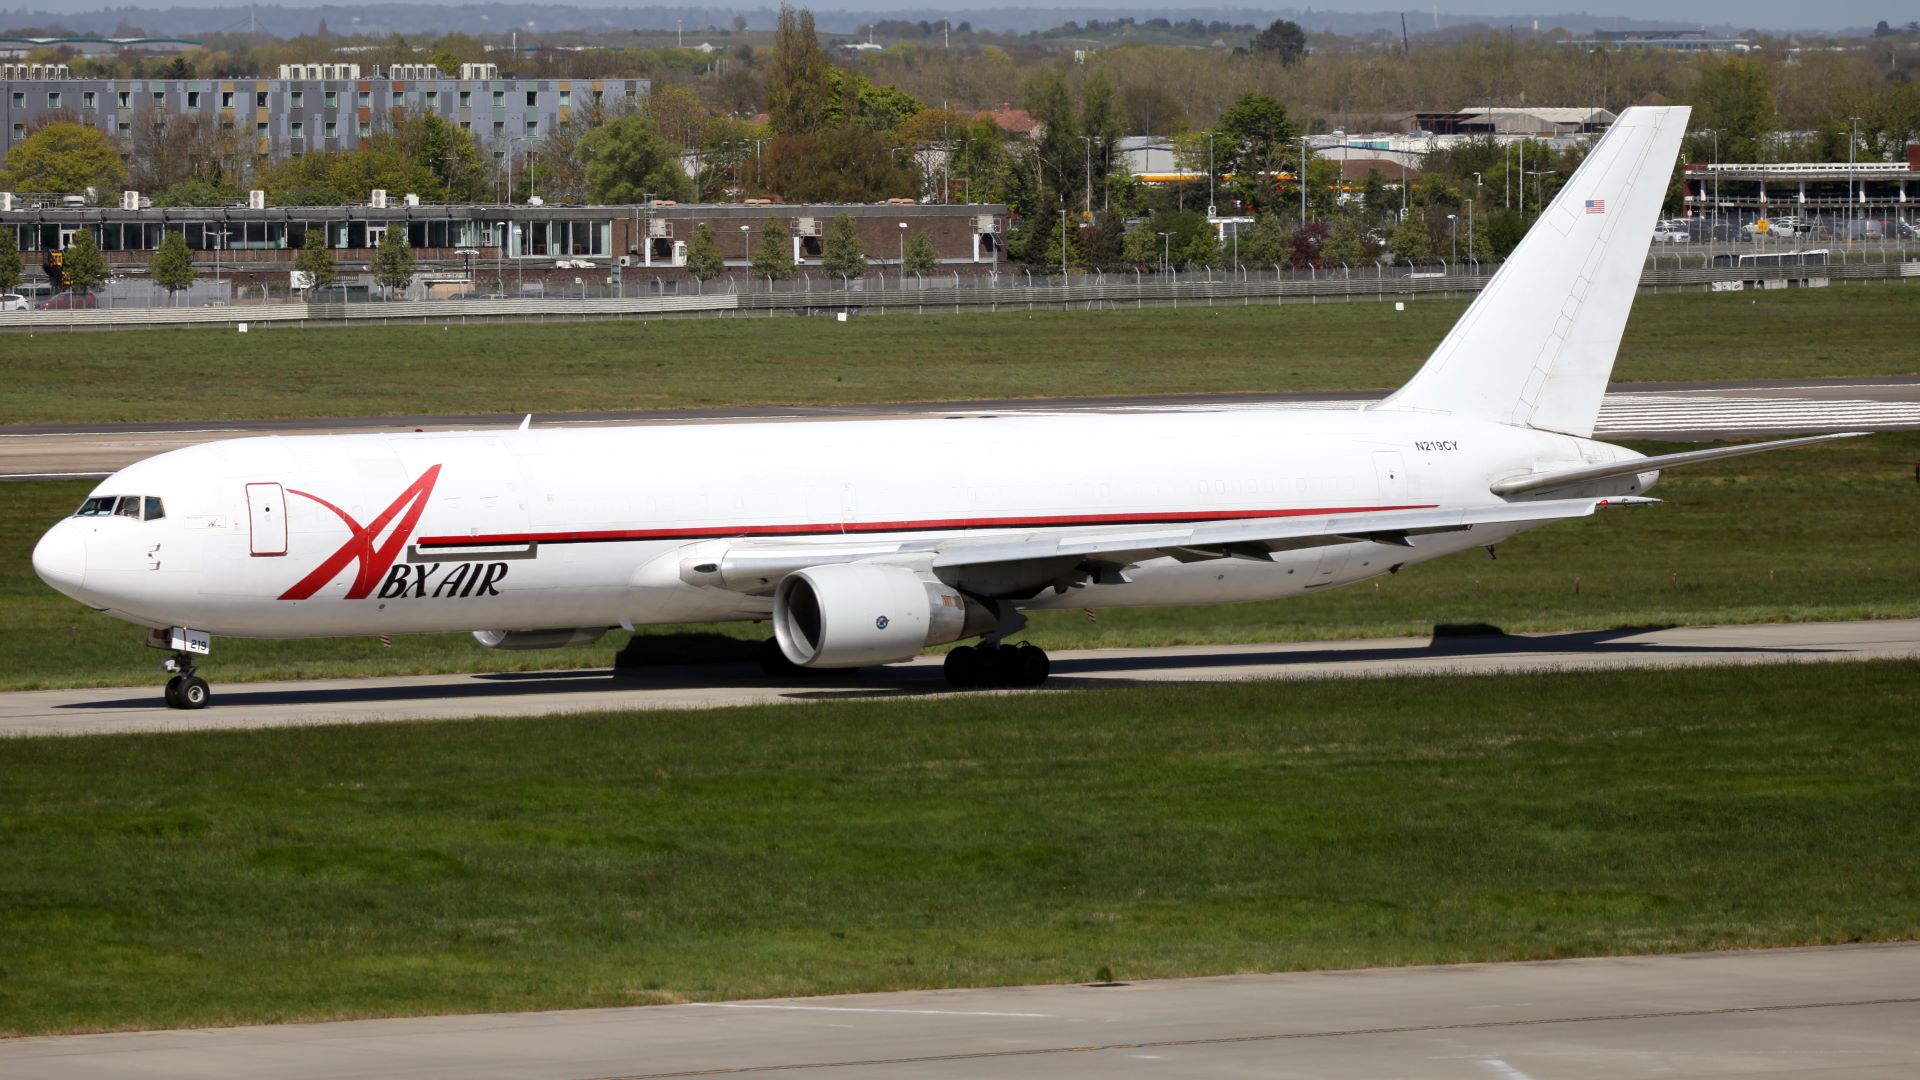 A large white cargo jet with ABX Air lettering rolls down runway.